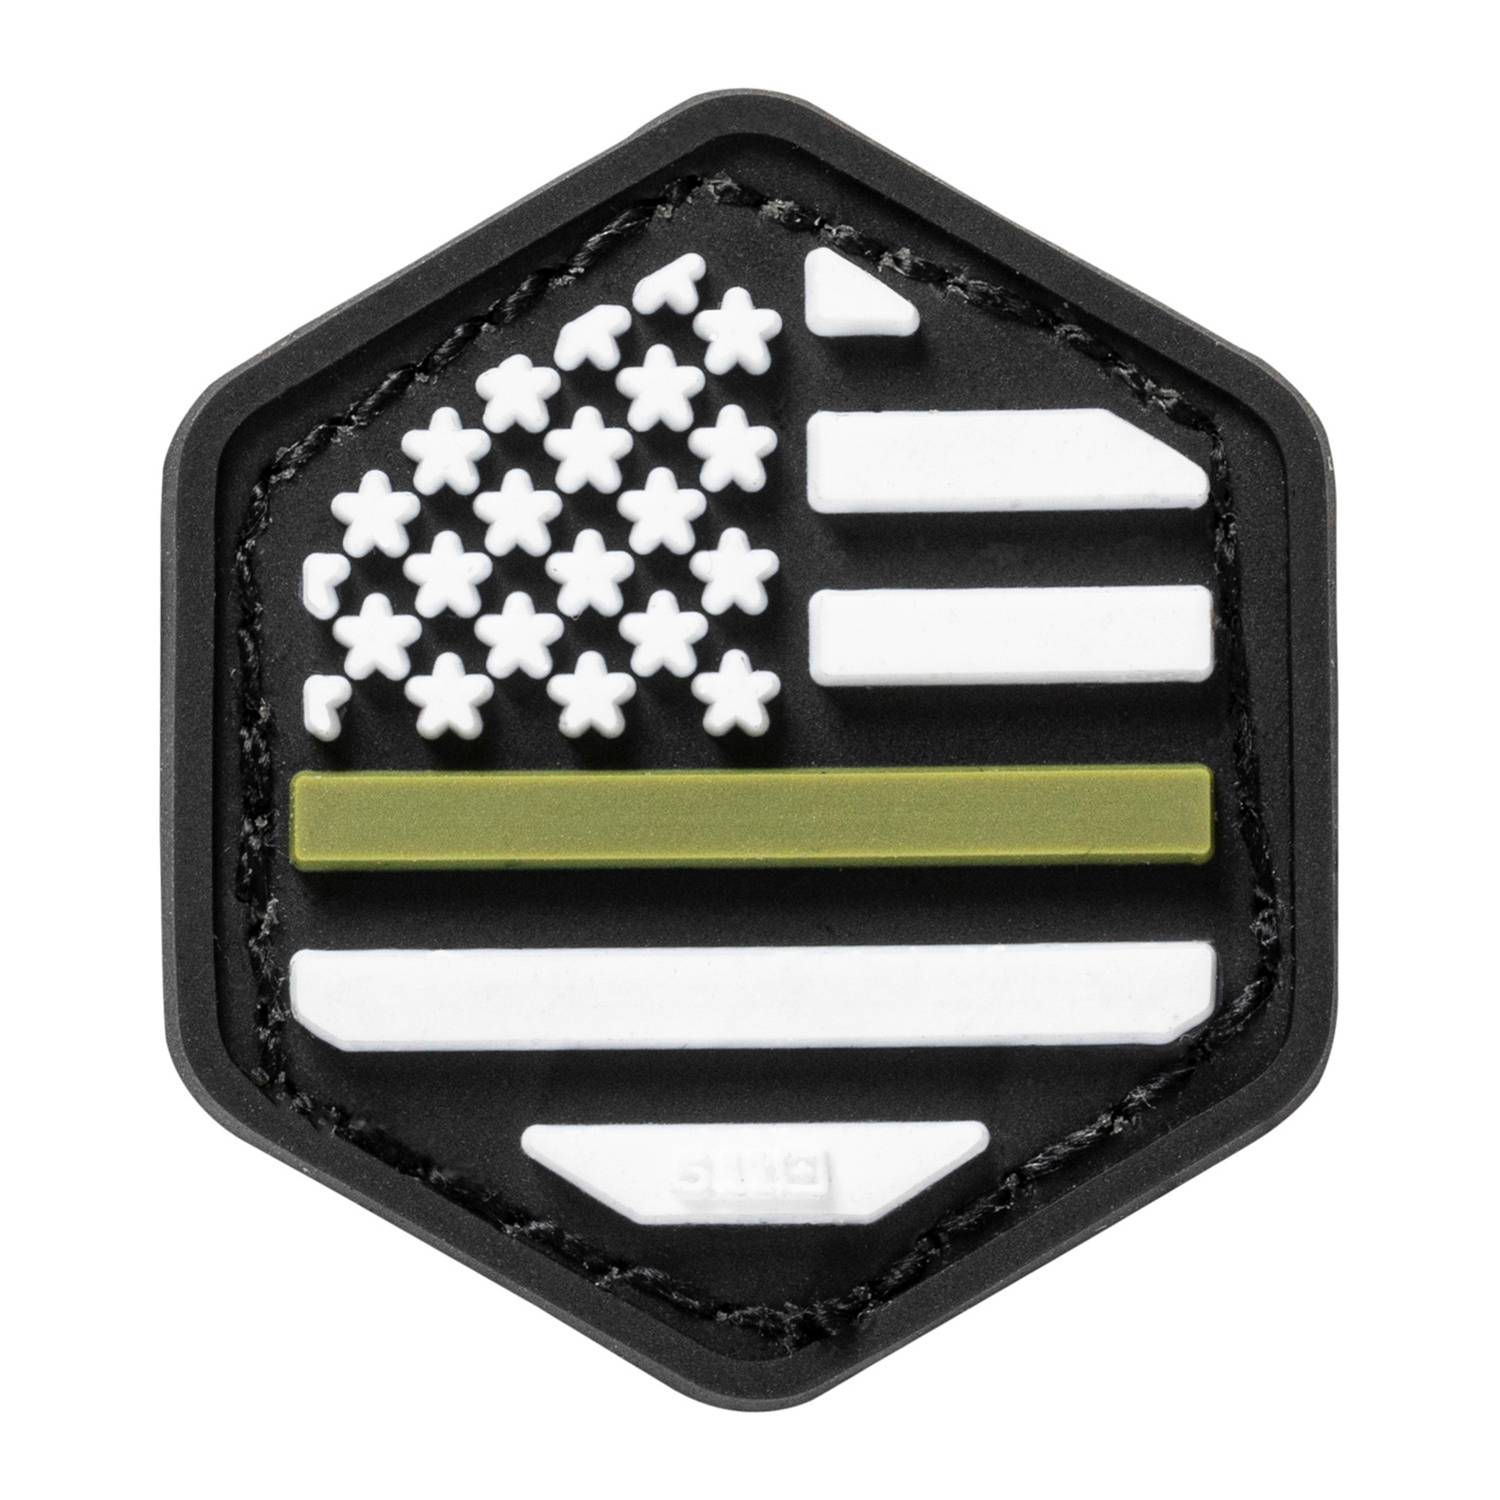 NEW SET OF 3 5.11 TACTICAL HEX GRID PATCH GLOW IN THE DARK SPARTAN, FLAG,  SCOPE